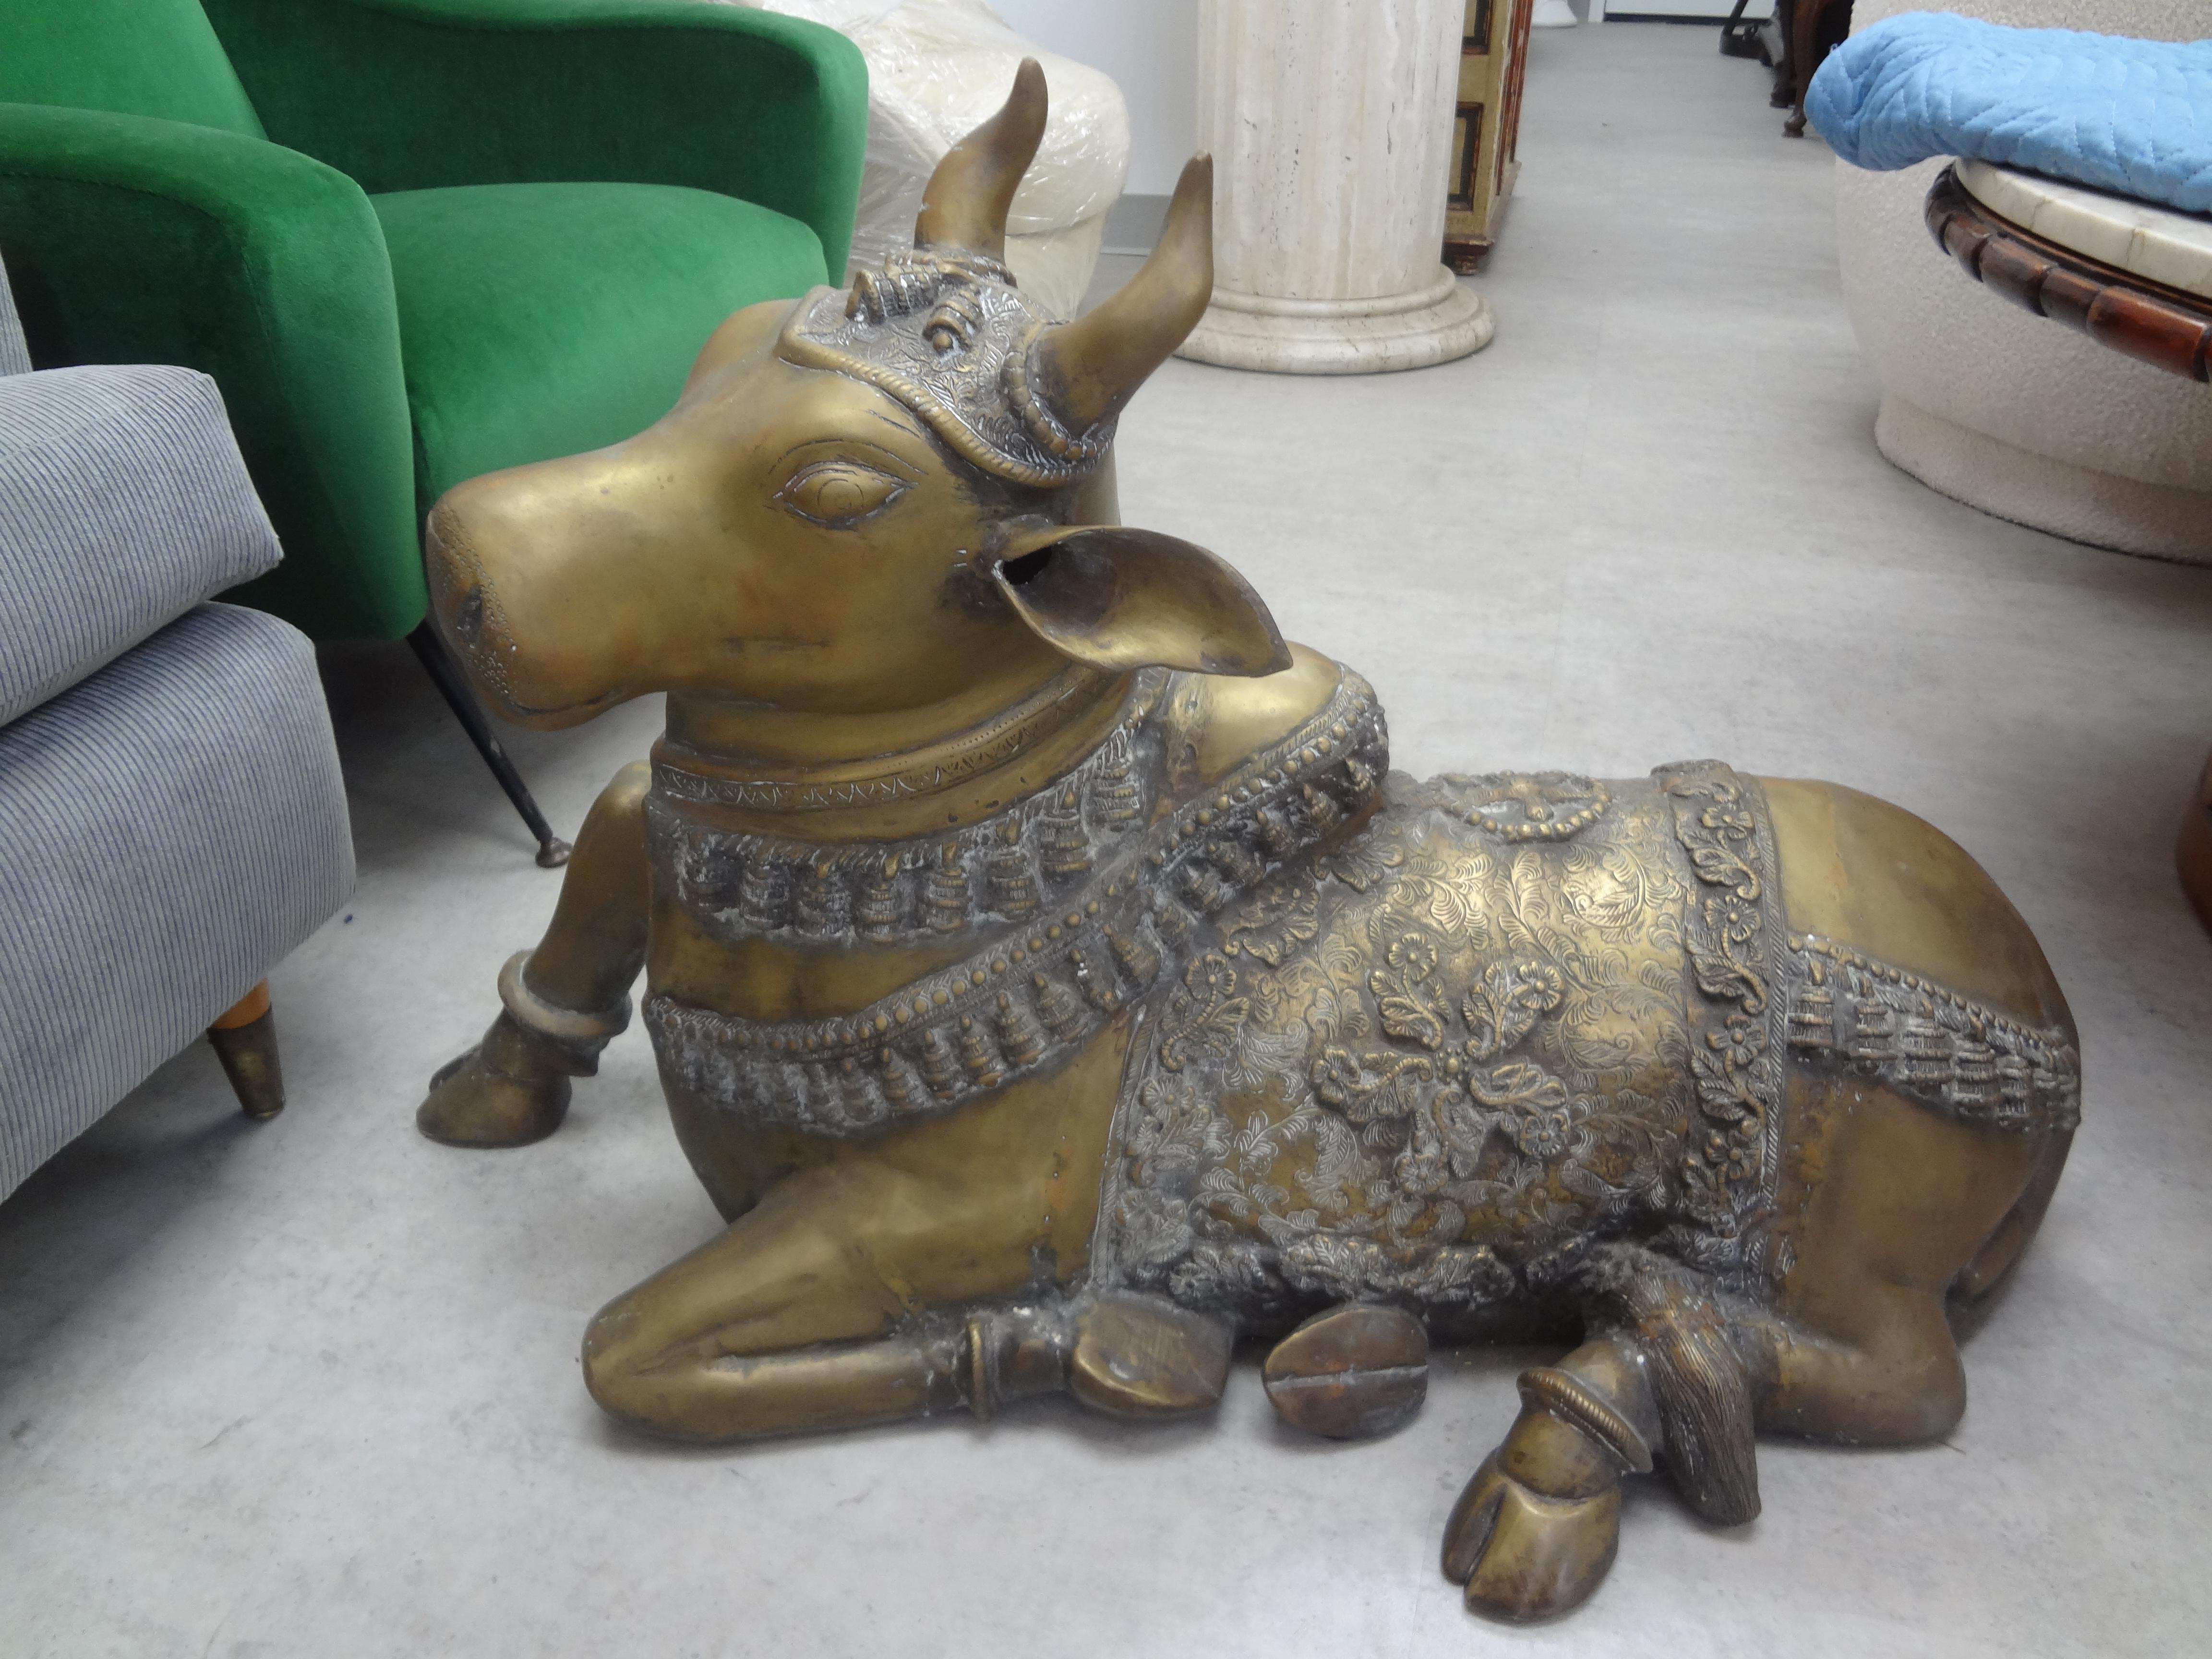 Vintage Anglo-Indian brass cow sculpture.
Beautiful detail and patina to the brass!